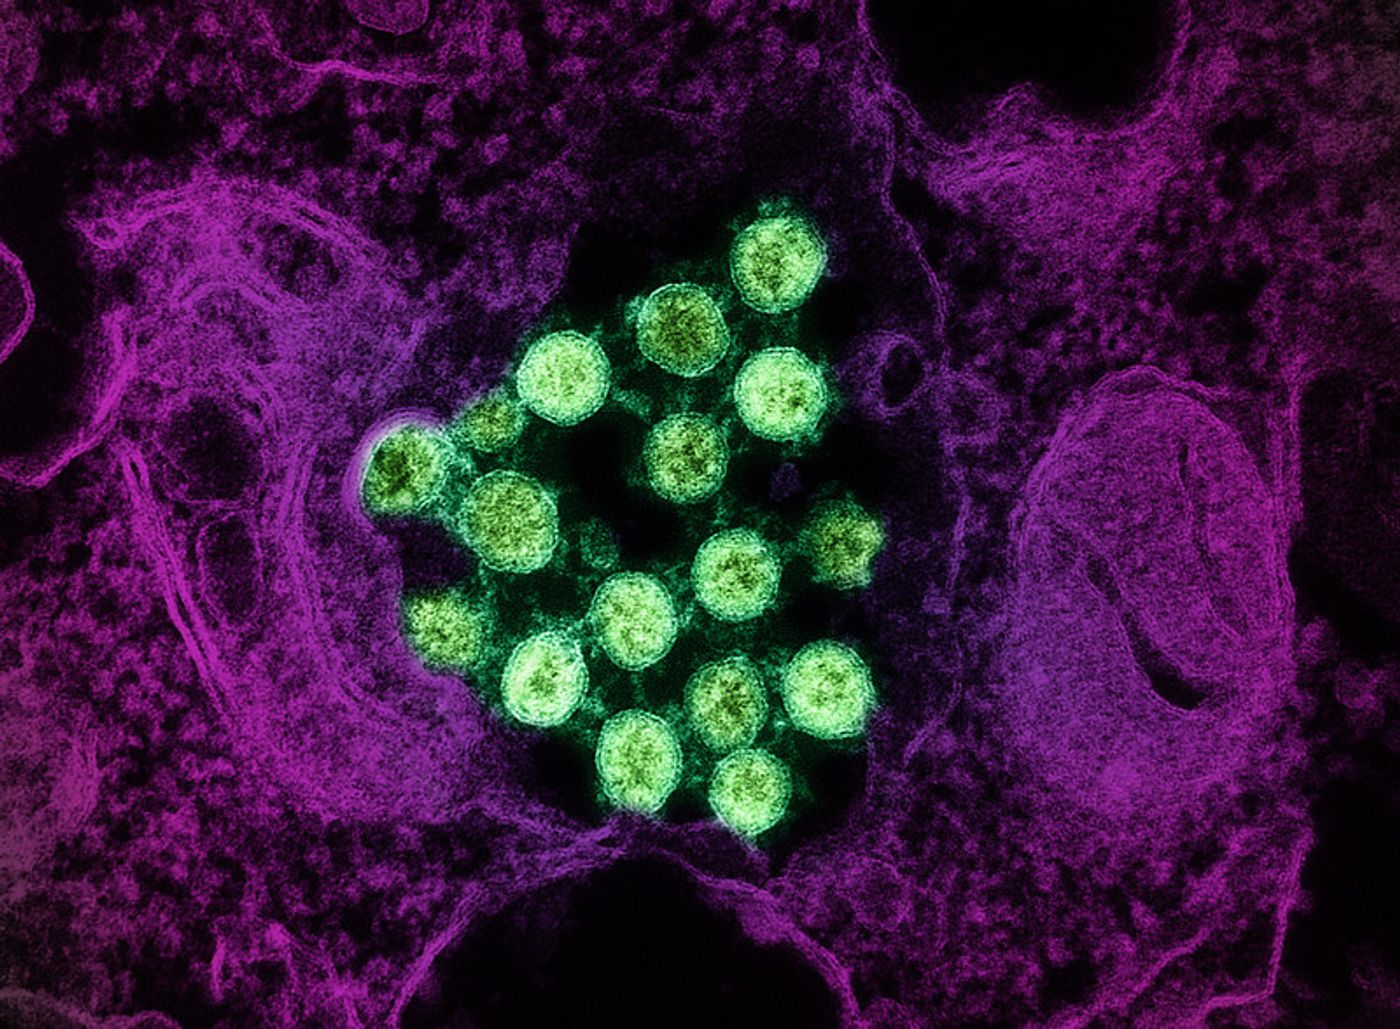 Transmission electron micrograph of SARS-CoV-2 virus particles (colorized green), isolated from a patient sample. Image captured at the NIAID Integrated Research Facility (IRF) in Fort Detrick, Maryland. Credit: NIAID